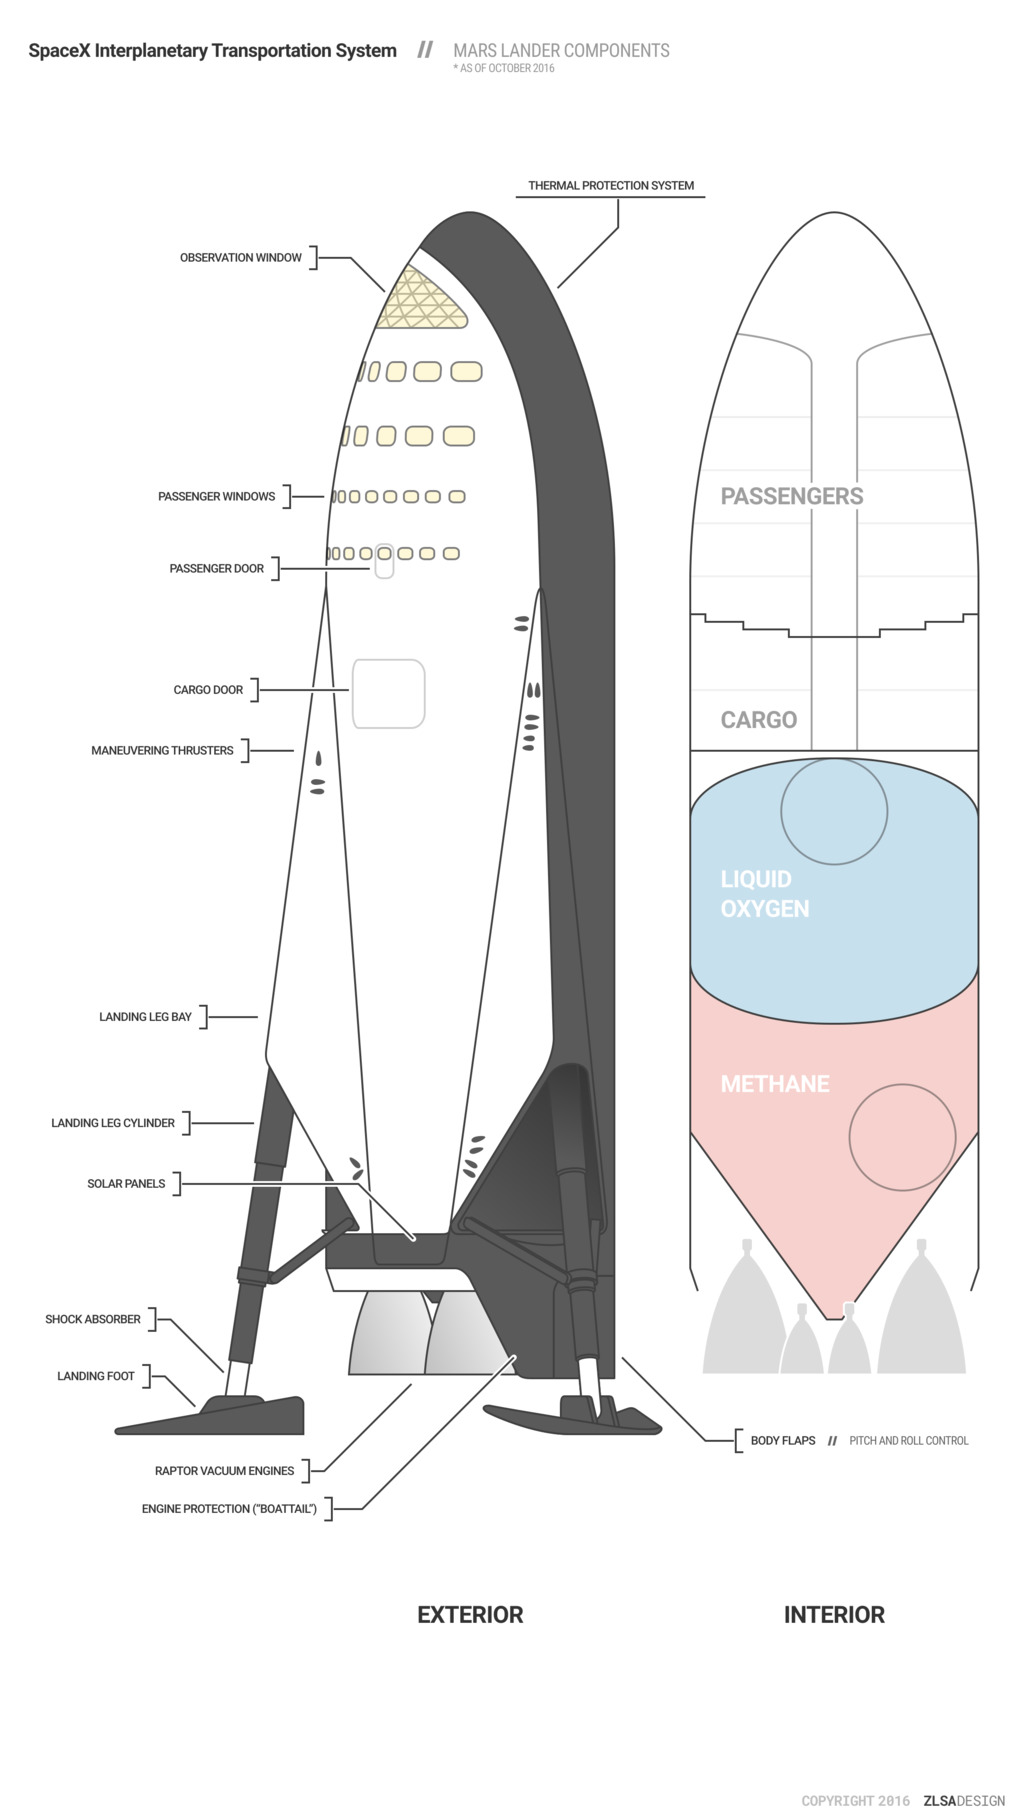 SpaceX ITS Mars Lander Components